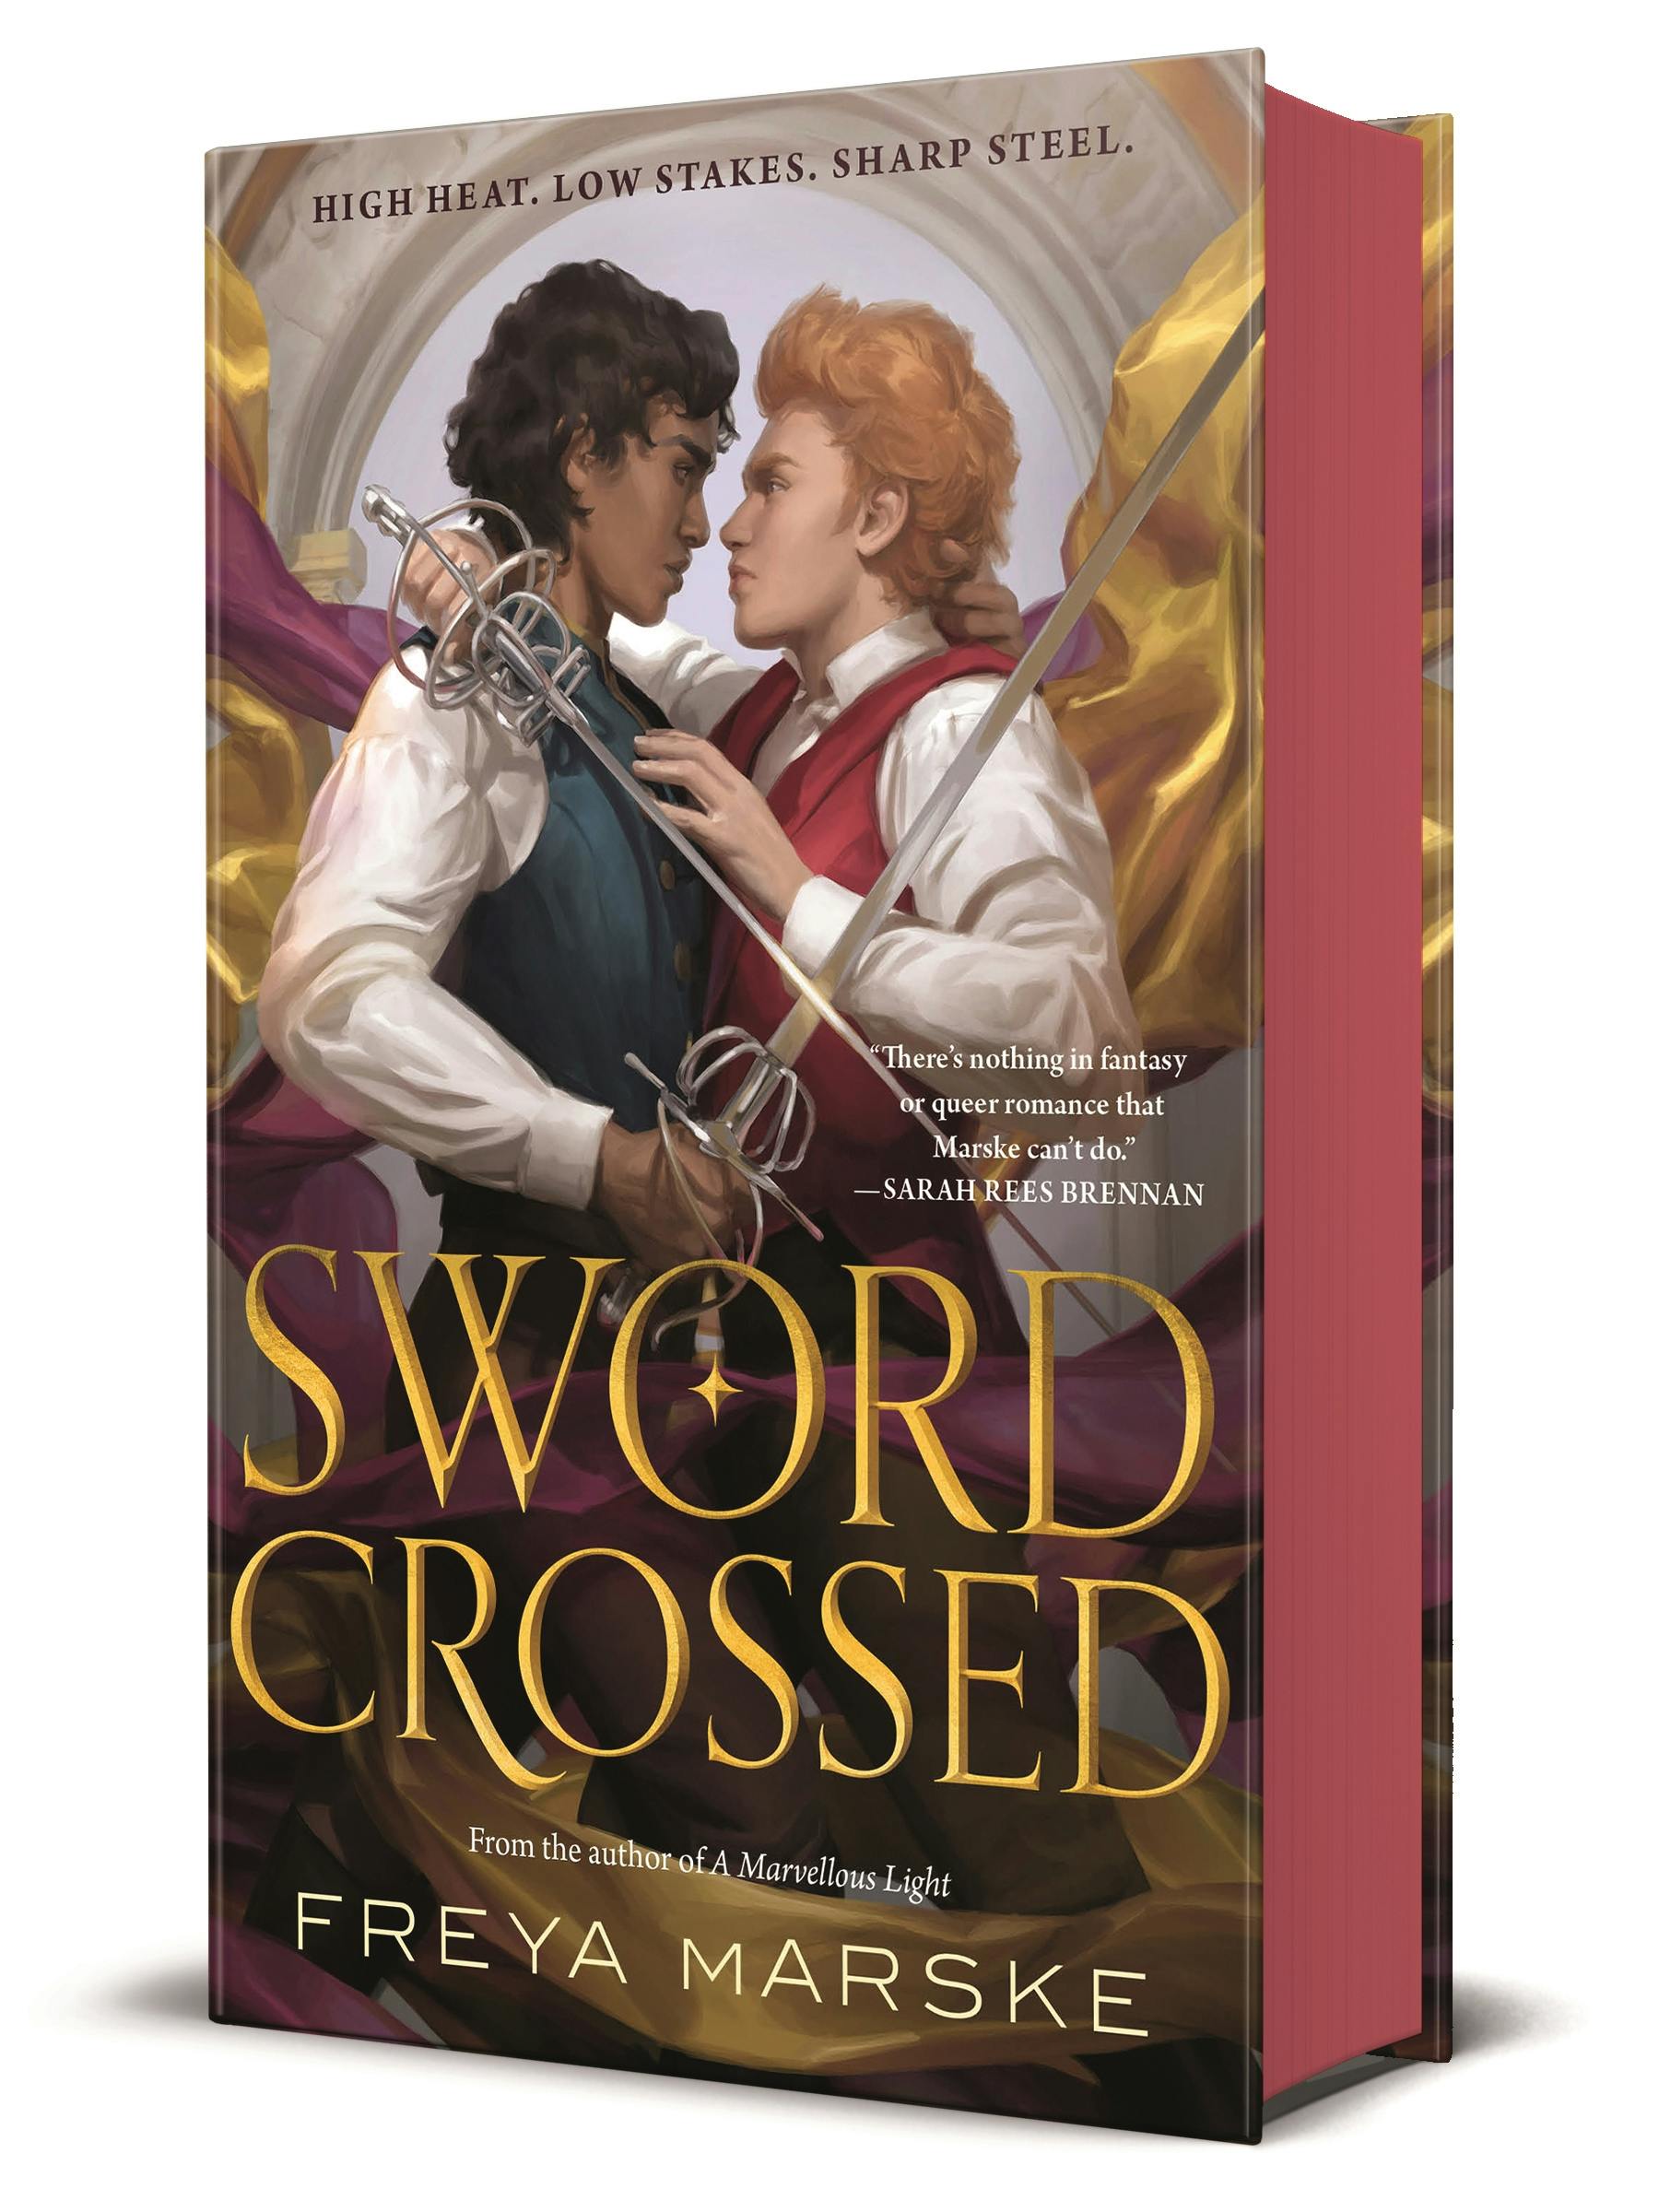 Cover for the book titled as: Swordcrossed